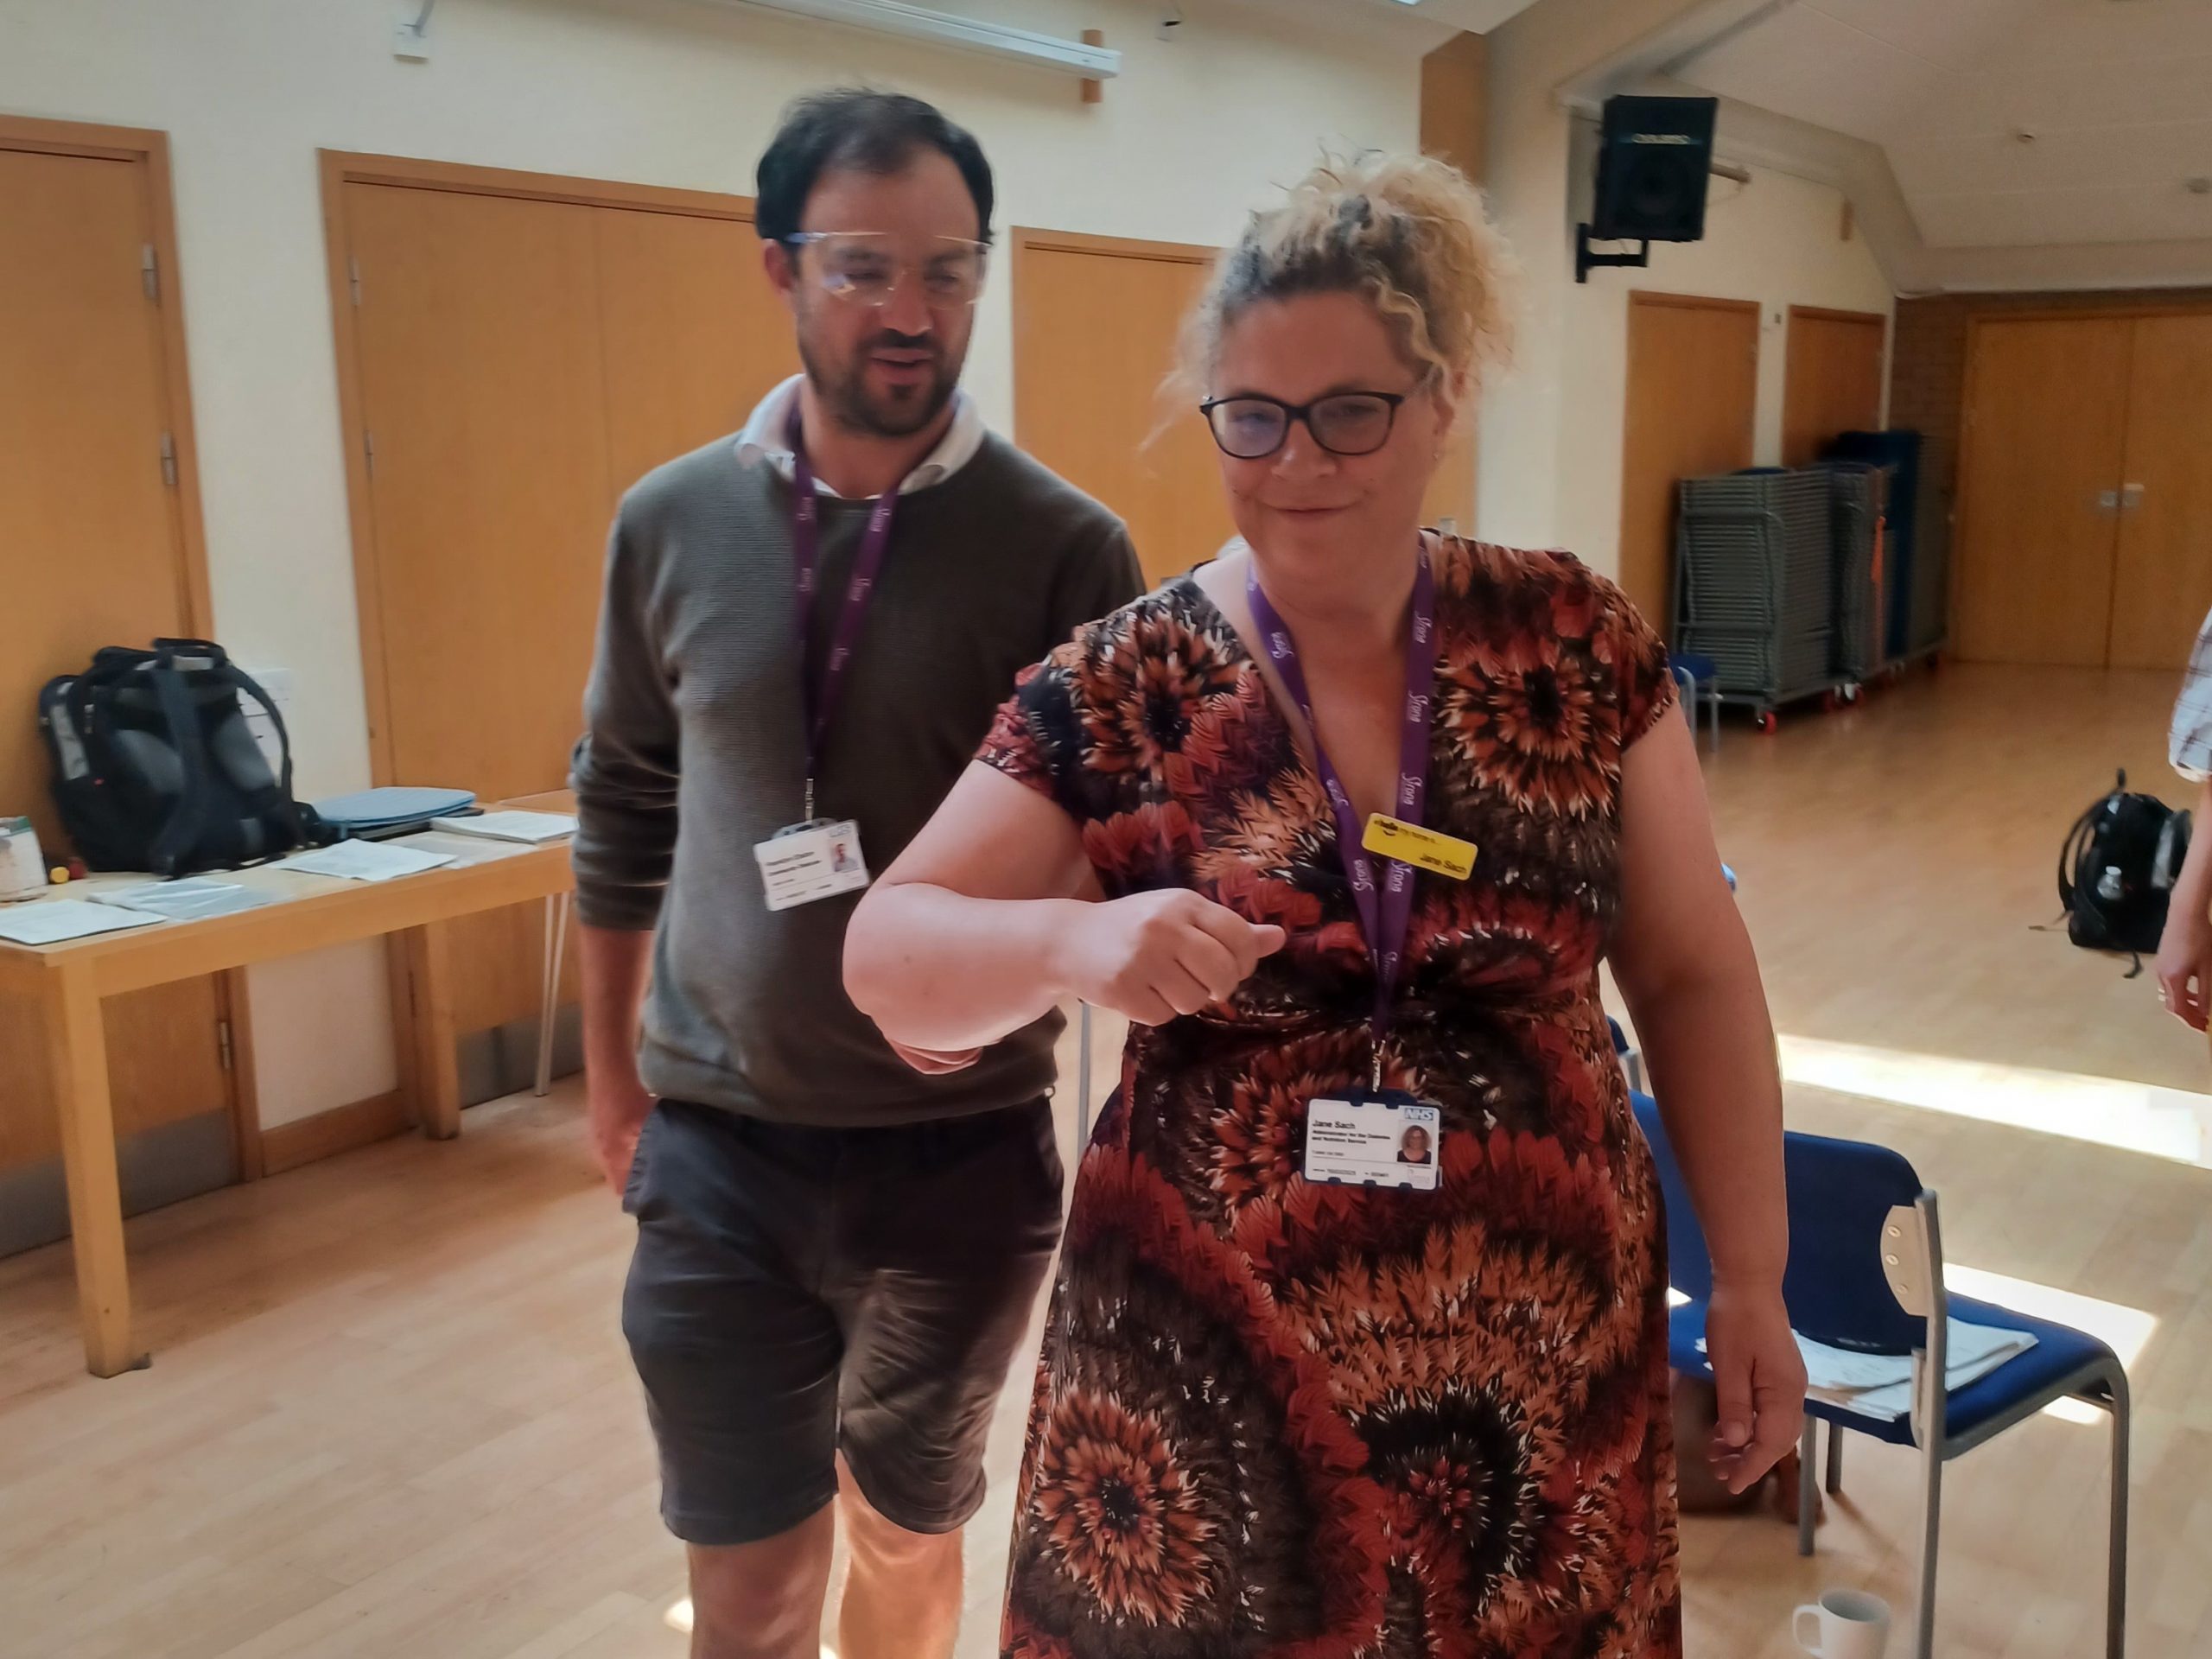 Two members of the Sirona DANS team are taking part in sighted guide training. The man is wearing sim specs, and being guided by a colleague.